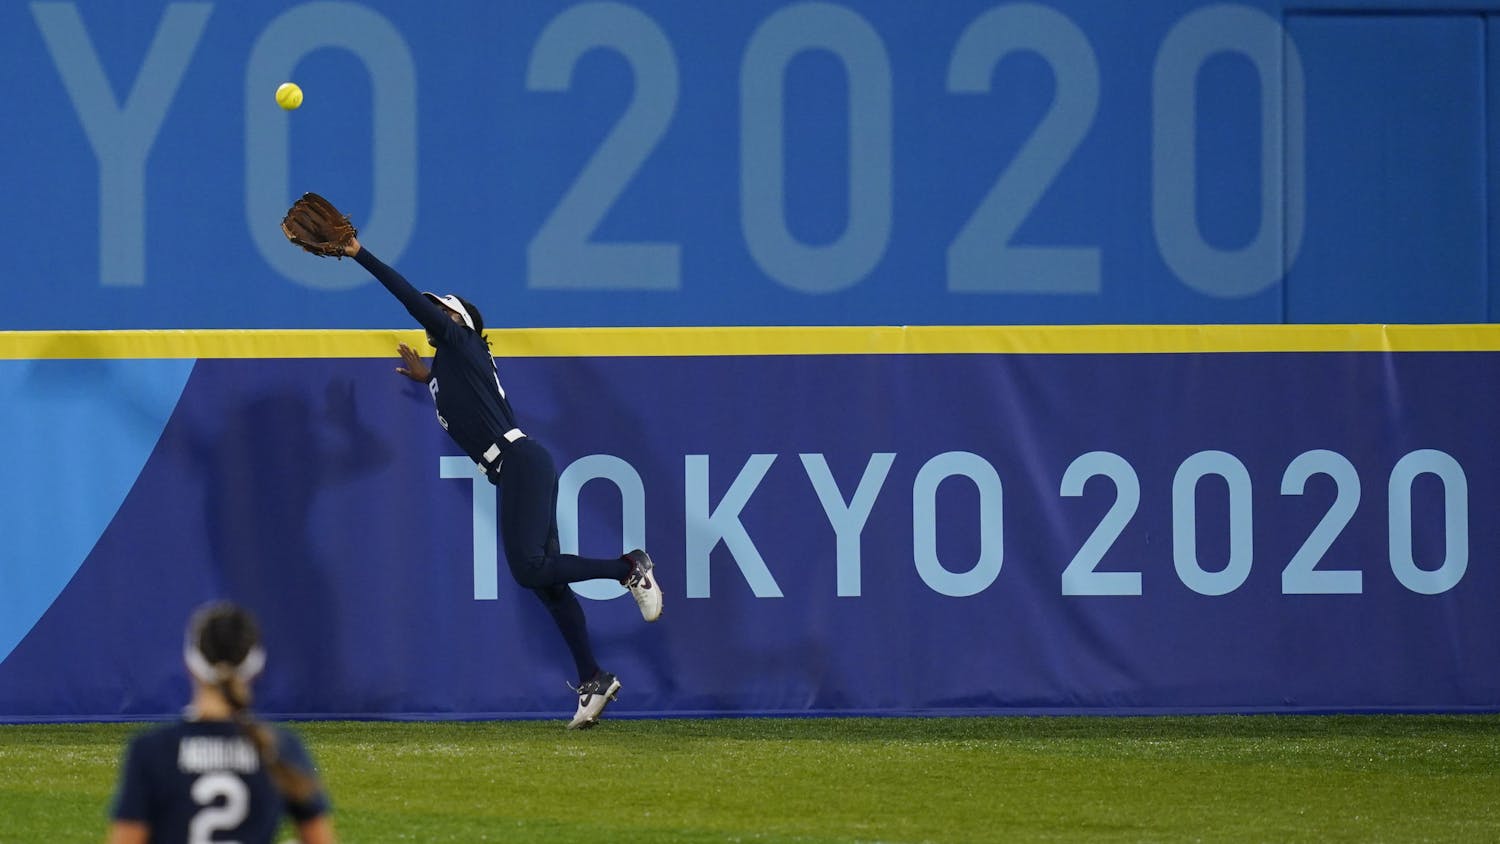 United States' Michelle Moultrie catches a fly out during a softball game against Japan at the 2020 Summer Olympics, Tuesday, July 27, 2021, in Yokohama, Japan. (AP Photo/Matt Slocum)